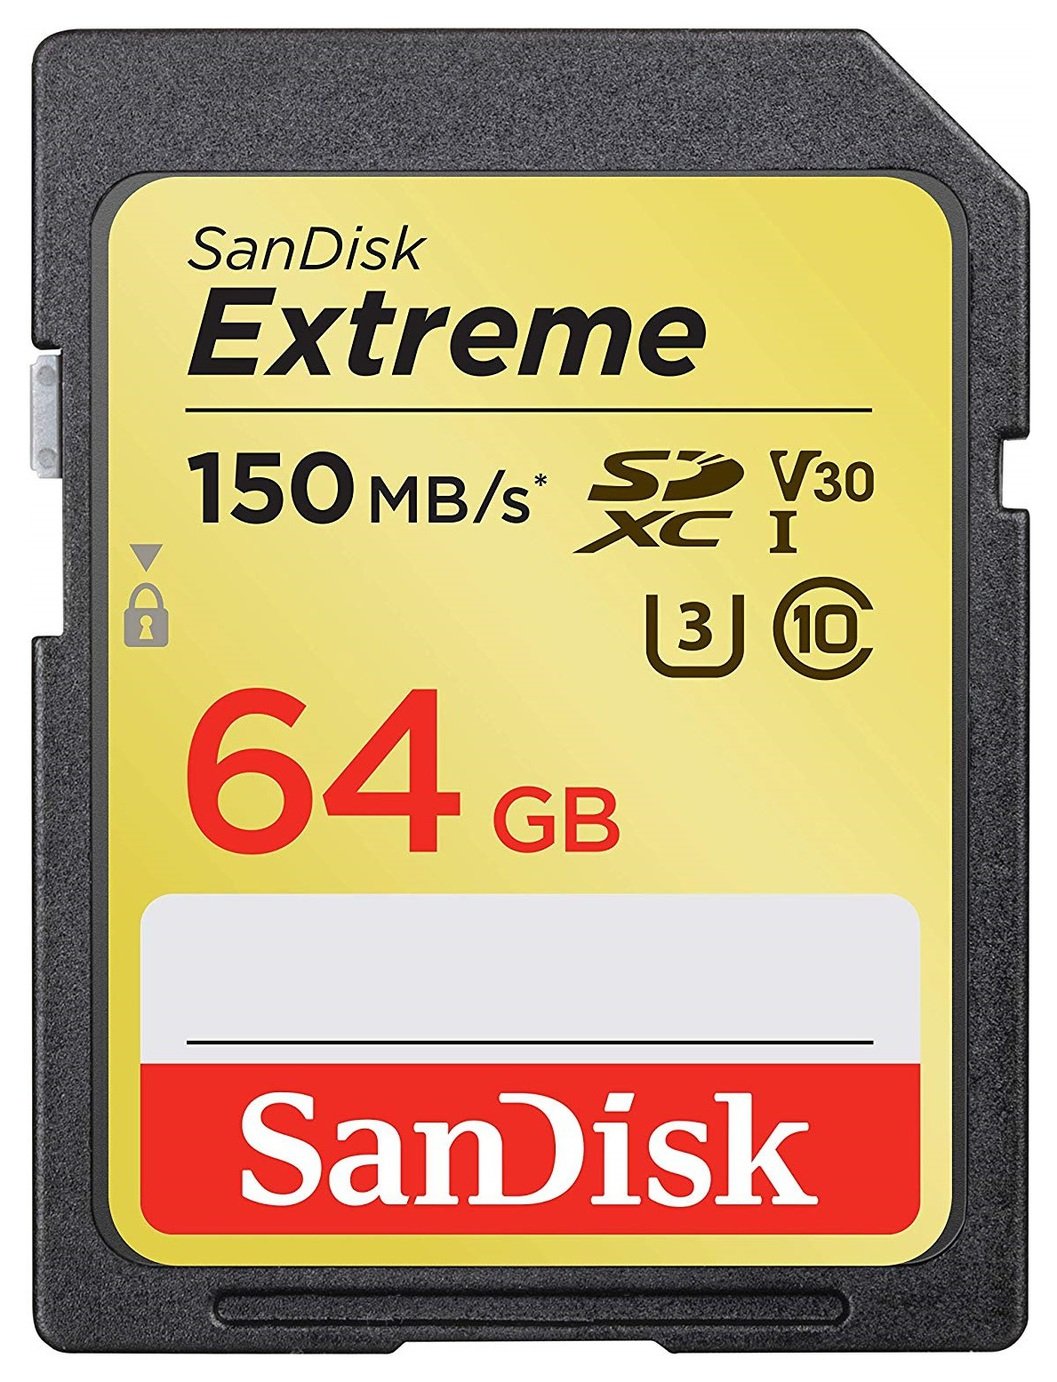 SanDisk Extreme 150MBs SDXC Memory Card Review